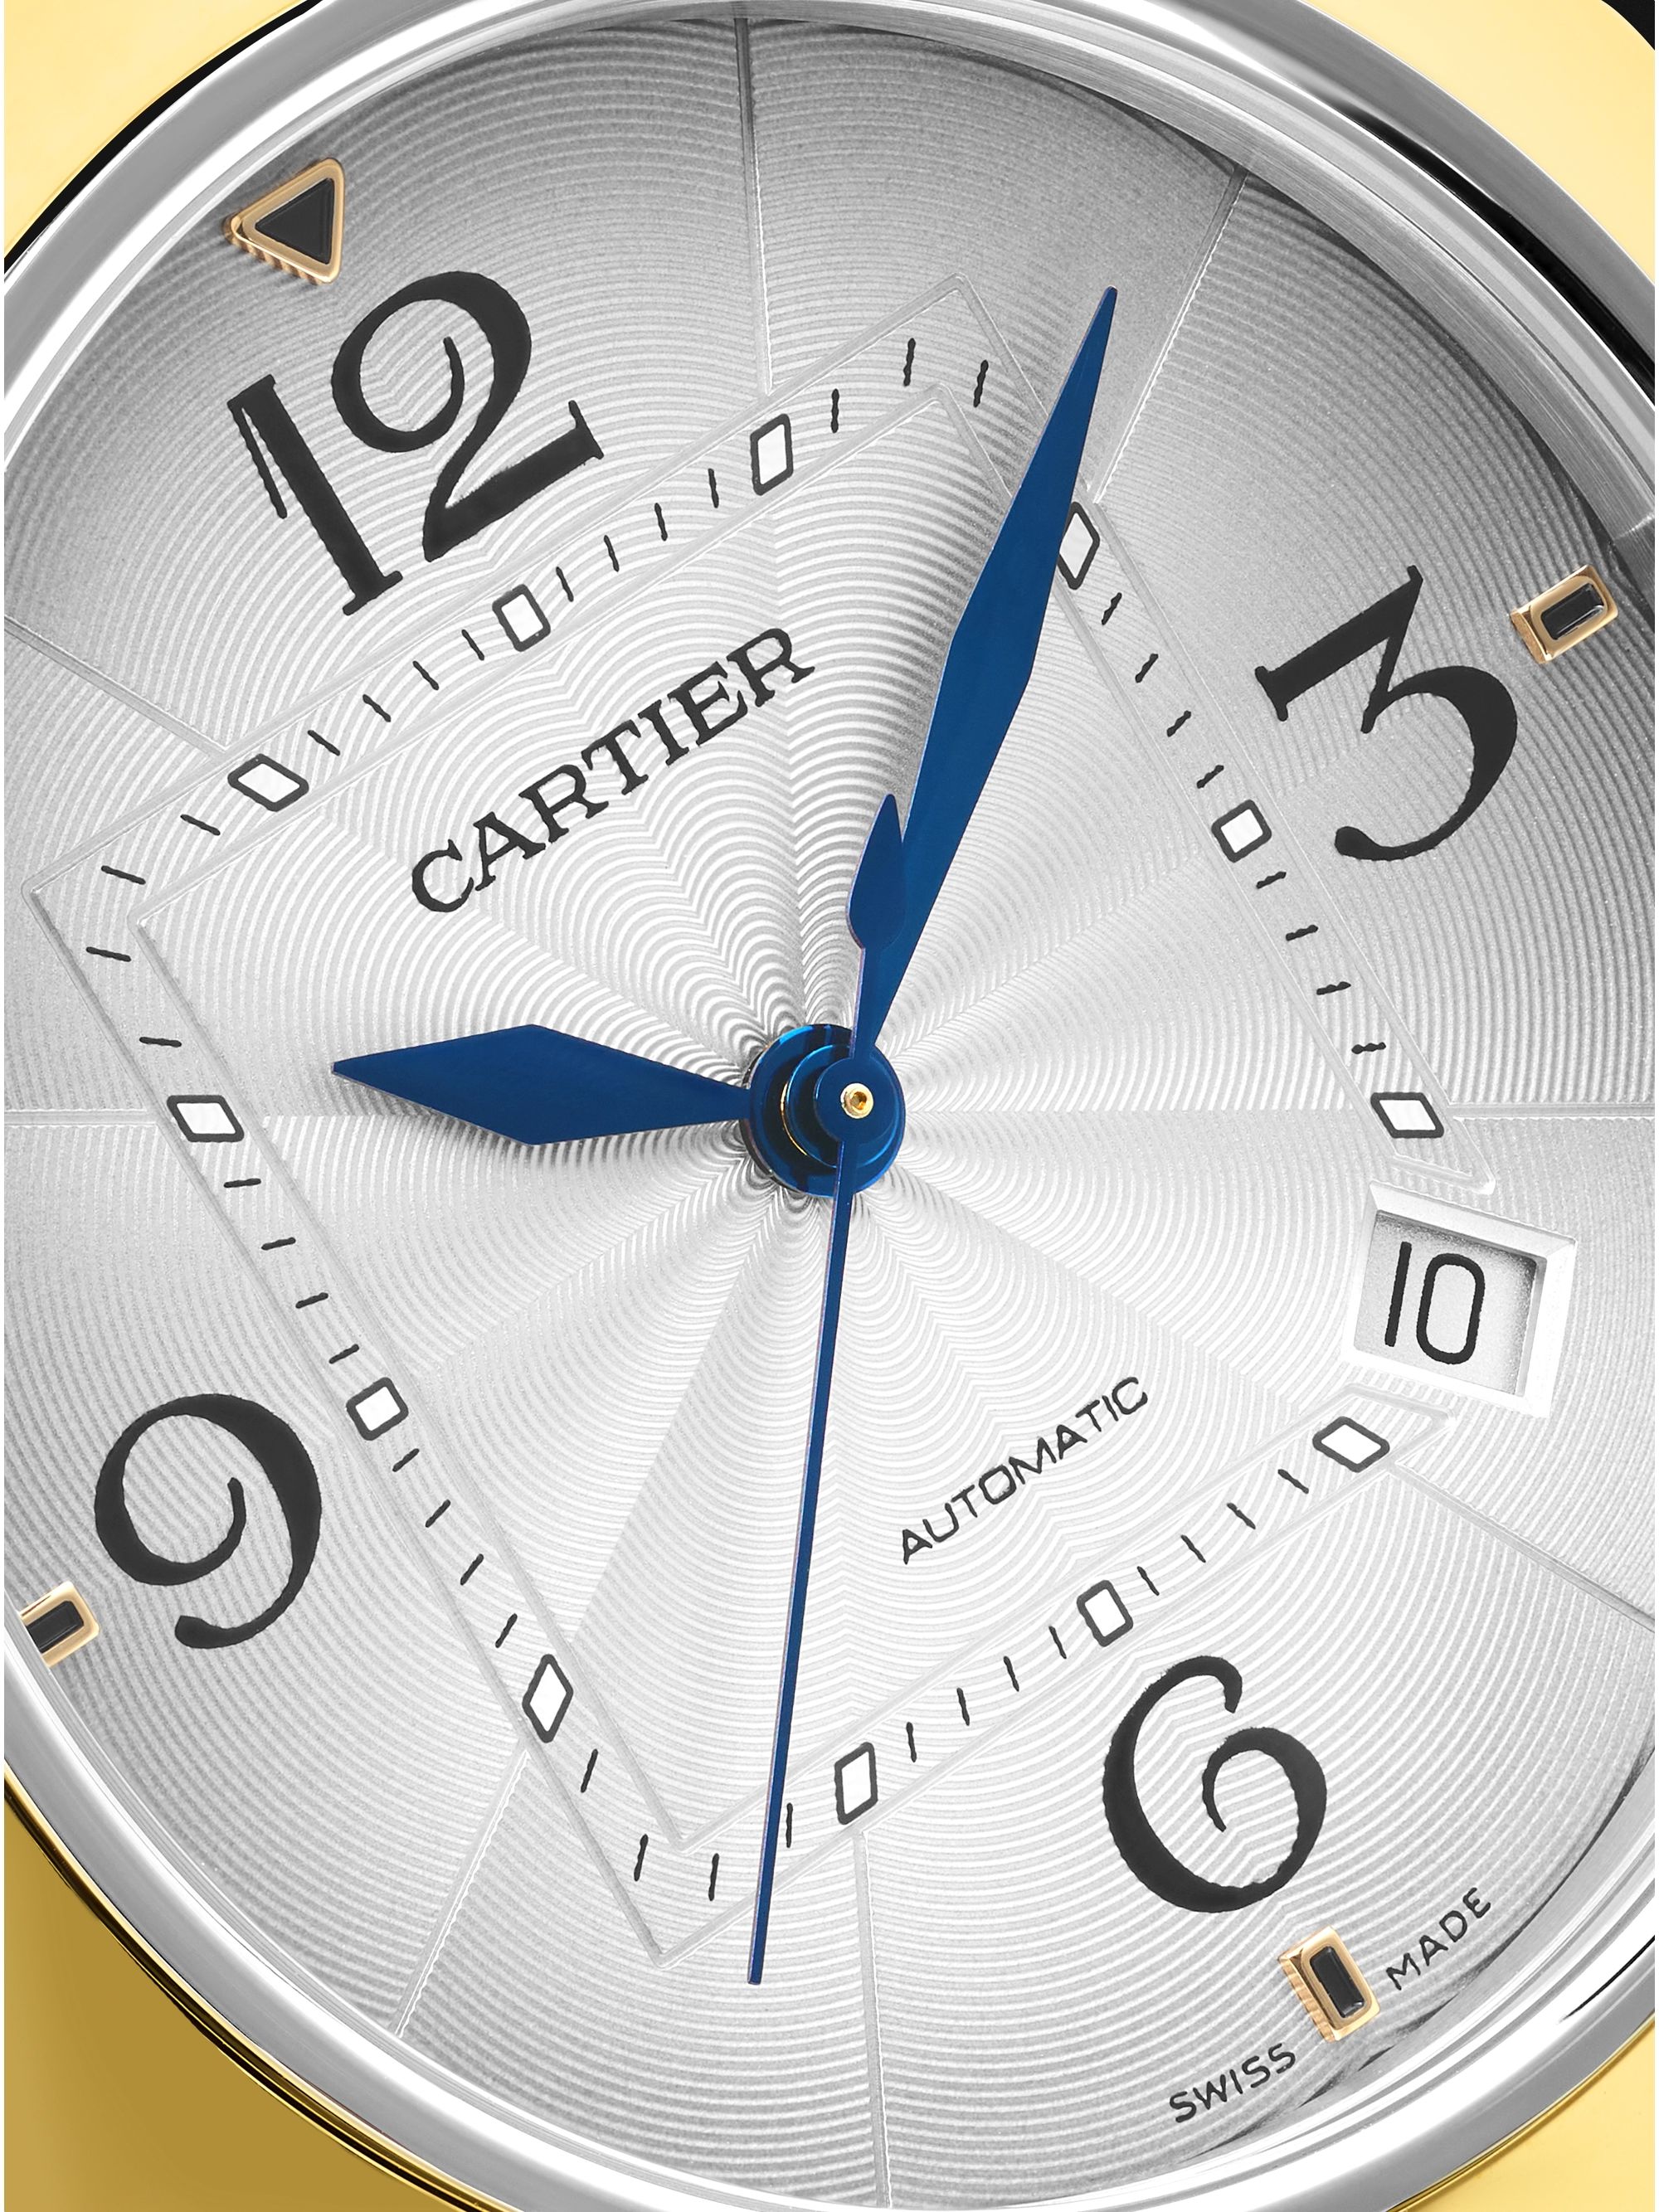 CARTIER Pasha de Cartier Automatic 41mm Stainless Steel and 18-Karat Gold Watch, Ref. No. W2PA0009